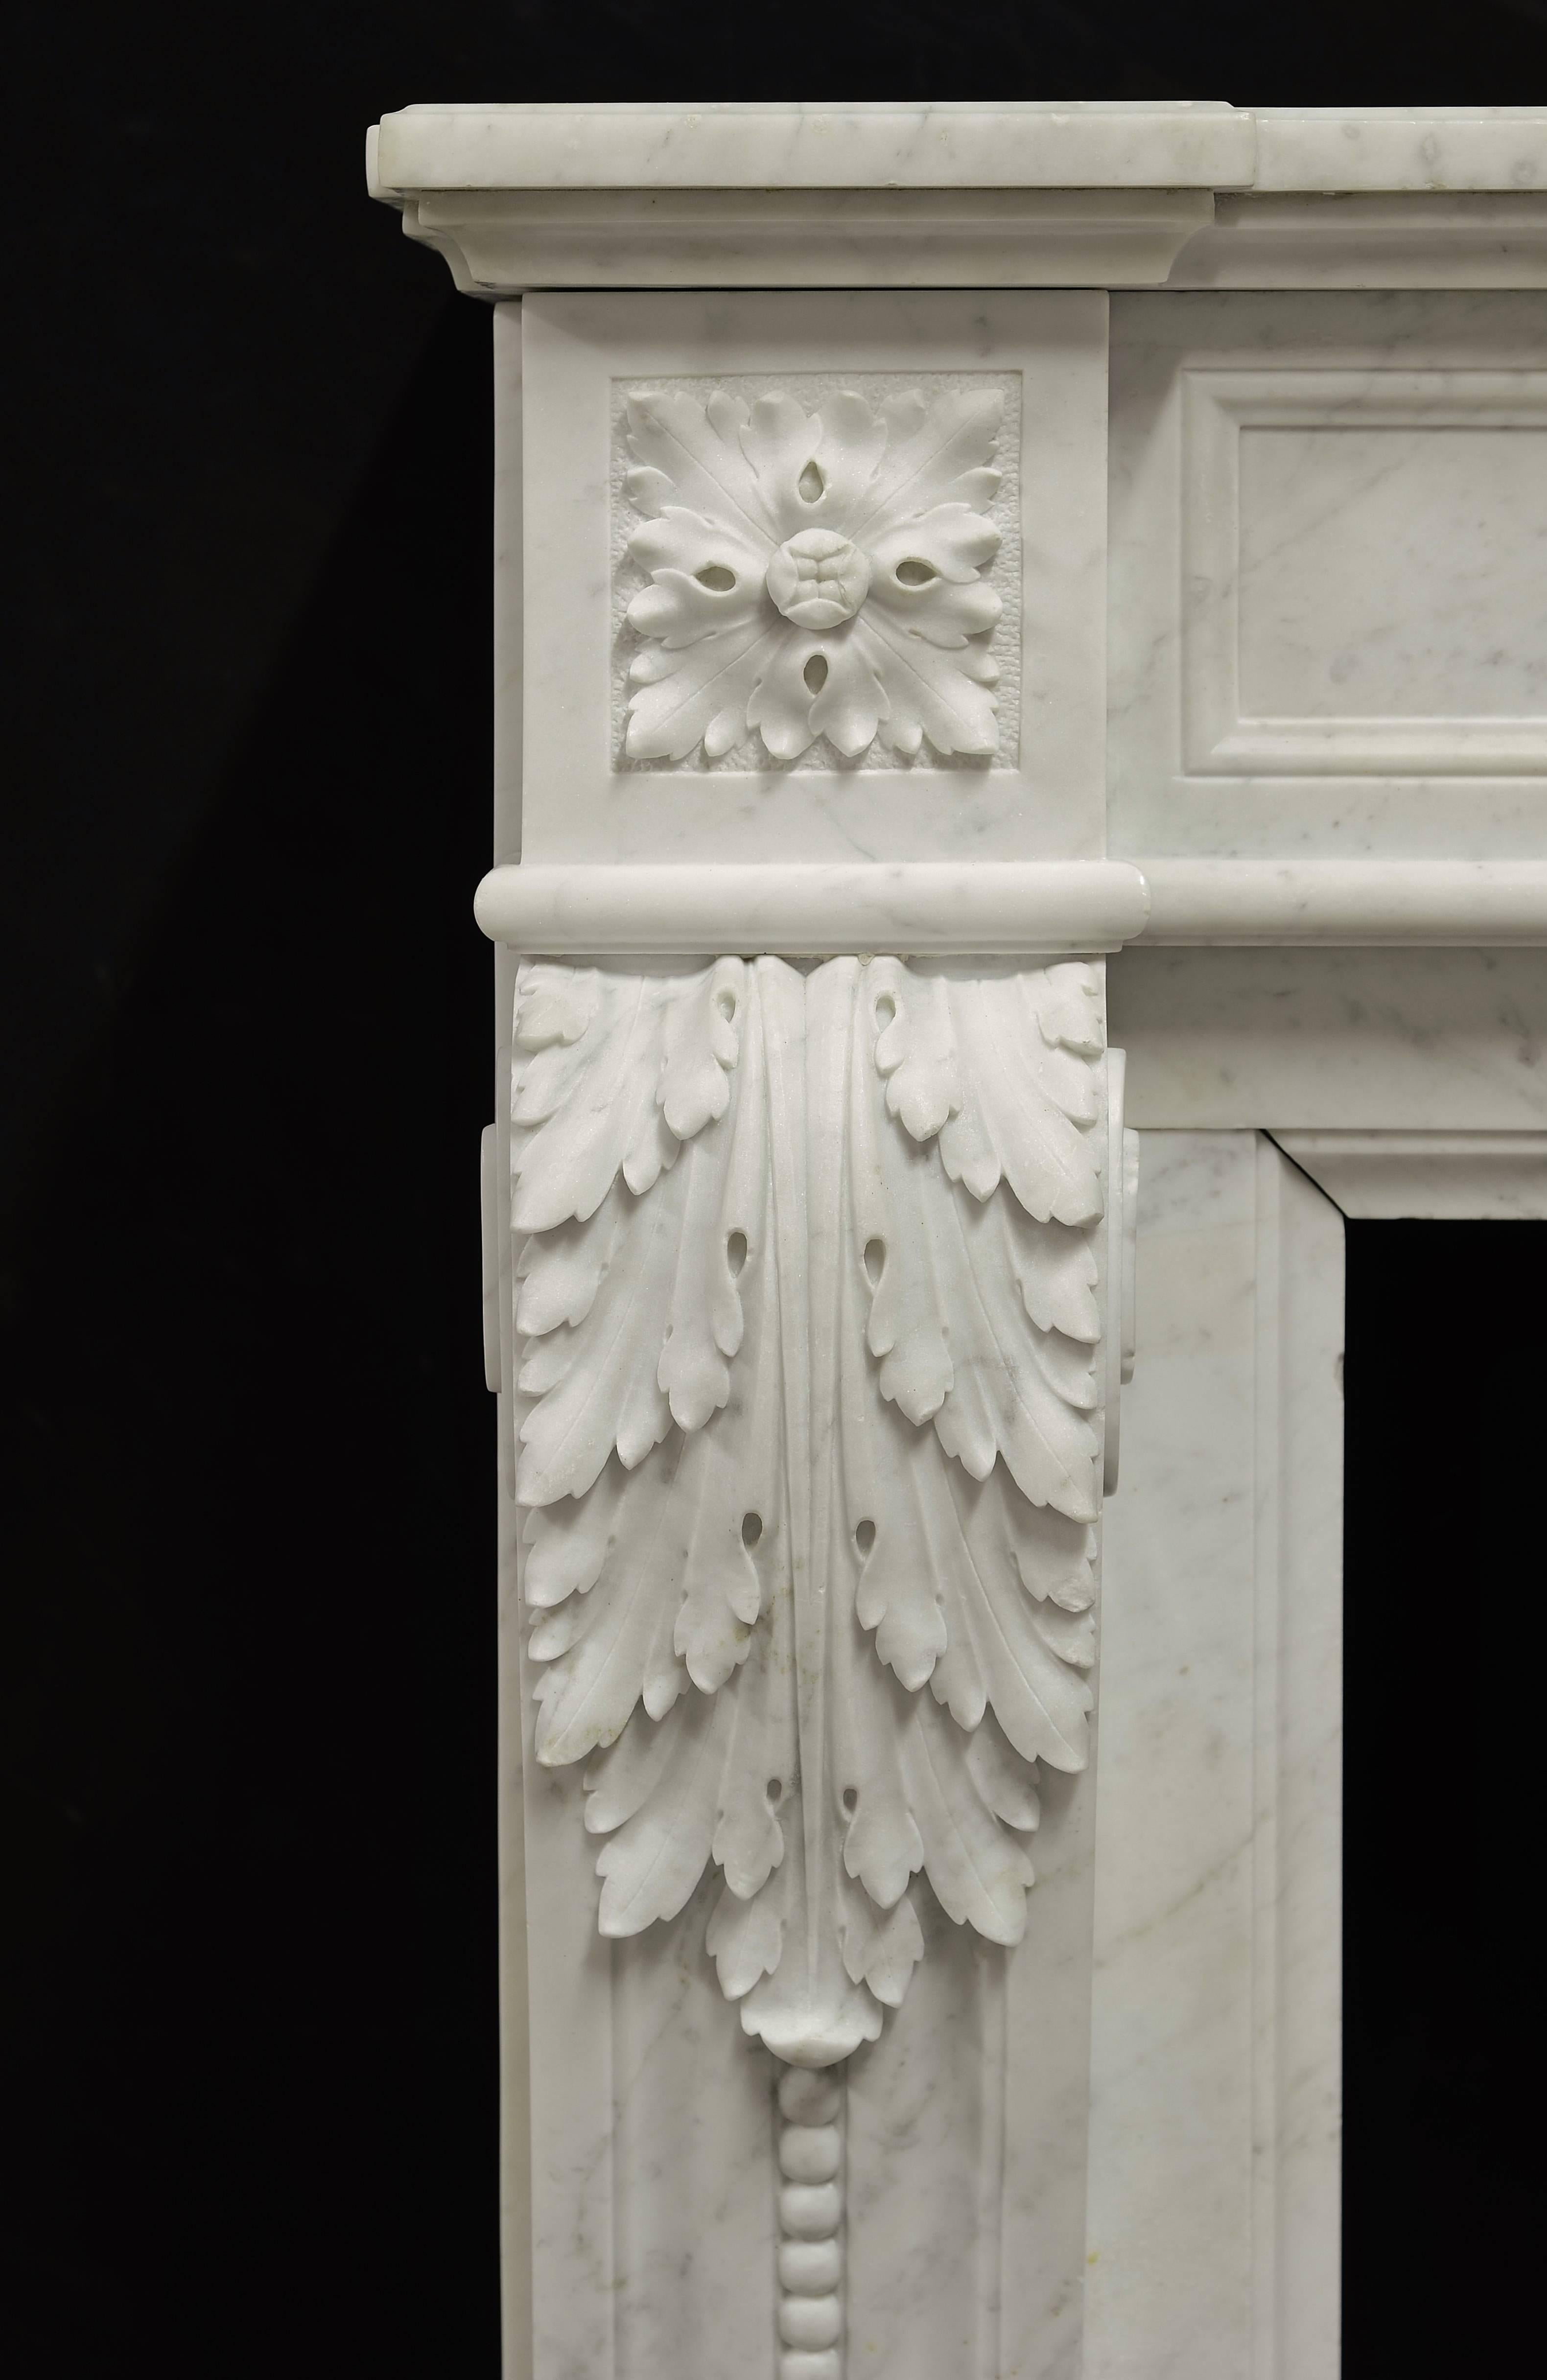 Polished Superb Antique French Louis XVI Fireplace Mantel, 19th Century